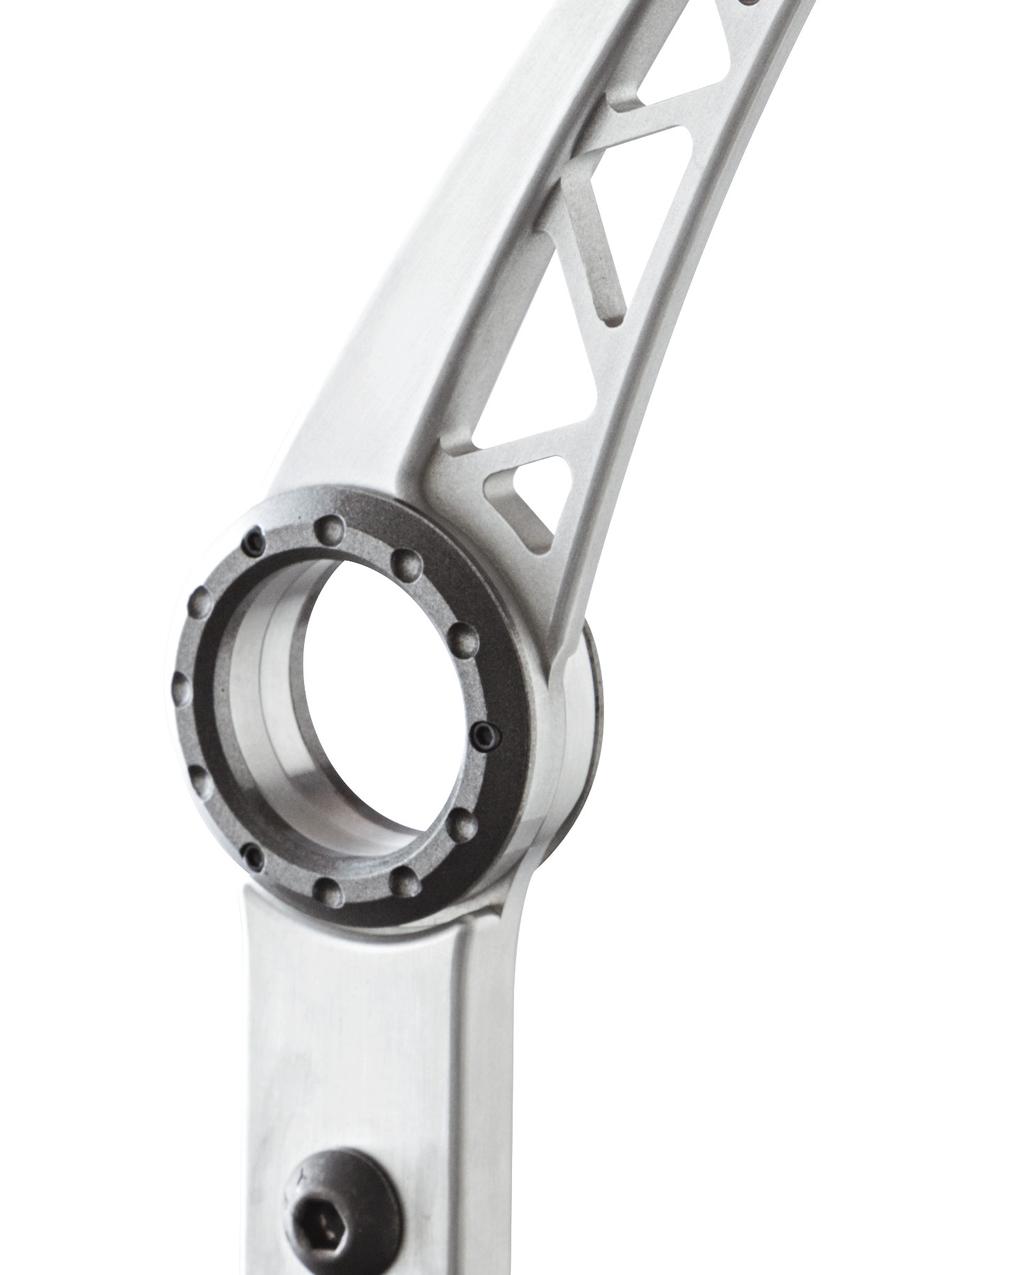 truss-style shifter arms machined from billet aluminum grey powder-coated finish available in 8 and 10